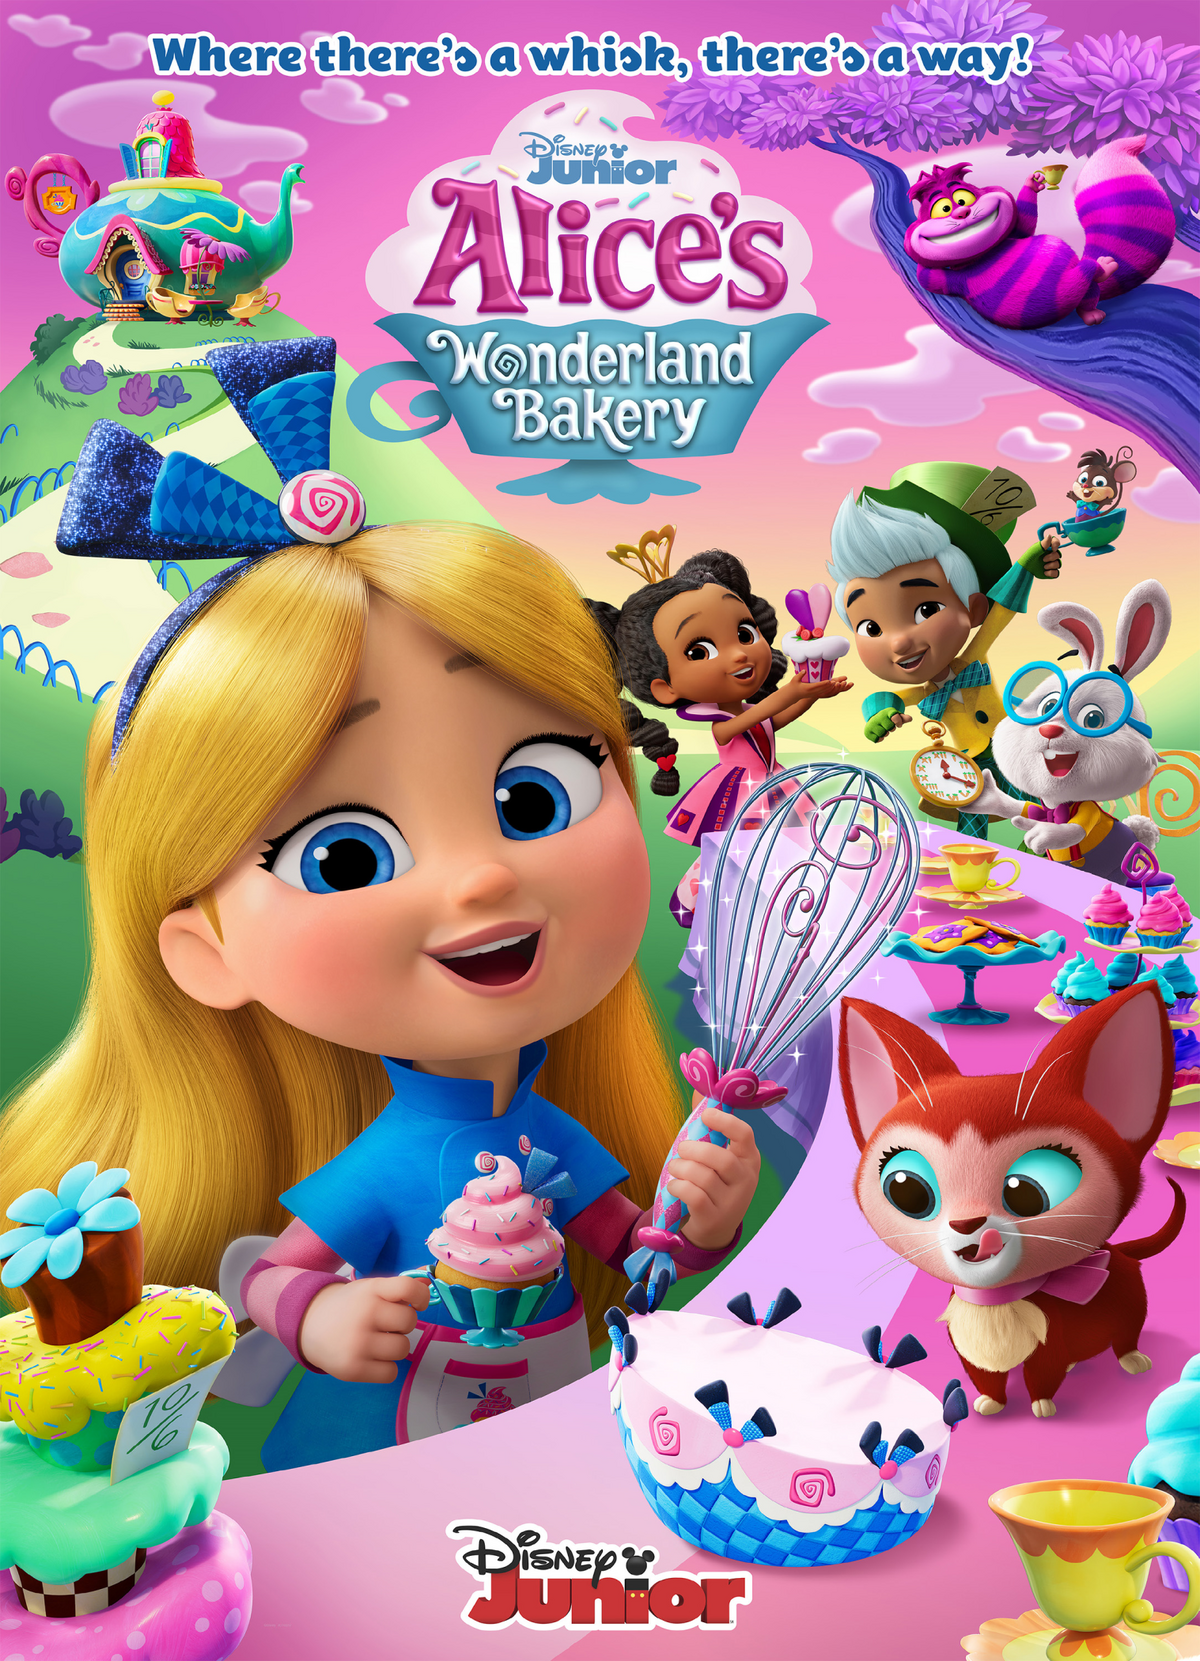 https://static.wikia.nocookie.net/looking-glass/images/0/0f/Alice%27s_Wonderland_Bakery_Poster.png/revision/latest/scale-to-width-down/1200?cb=20220926132653